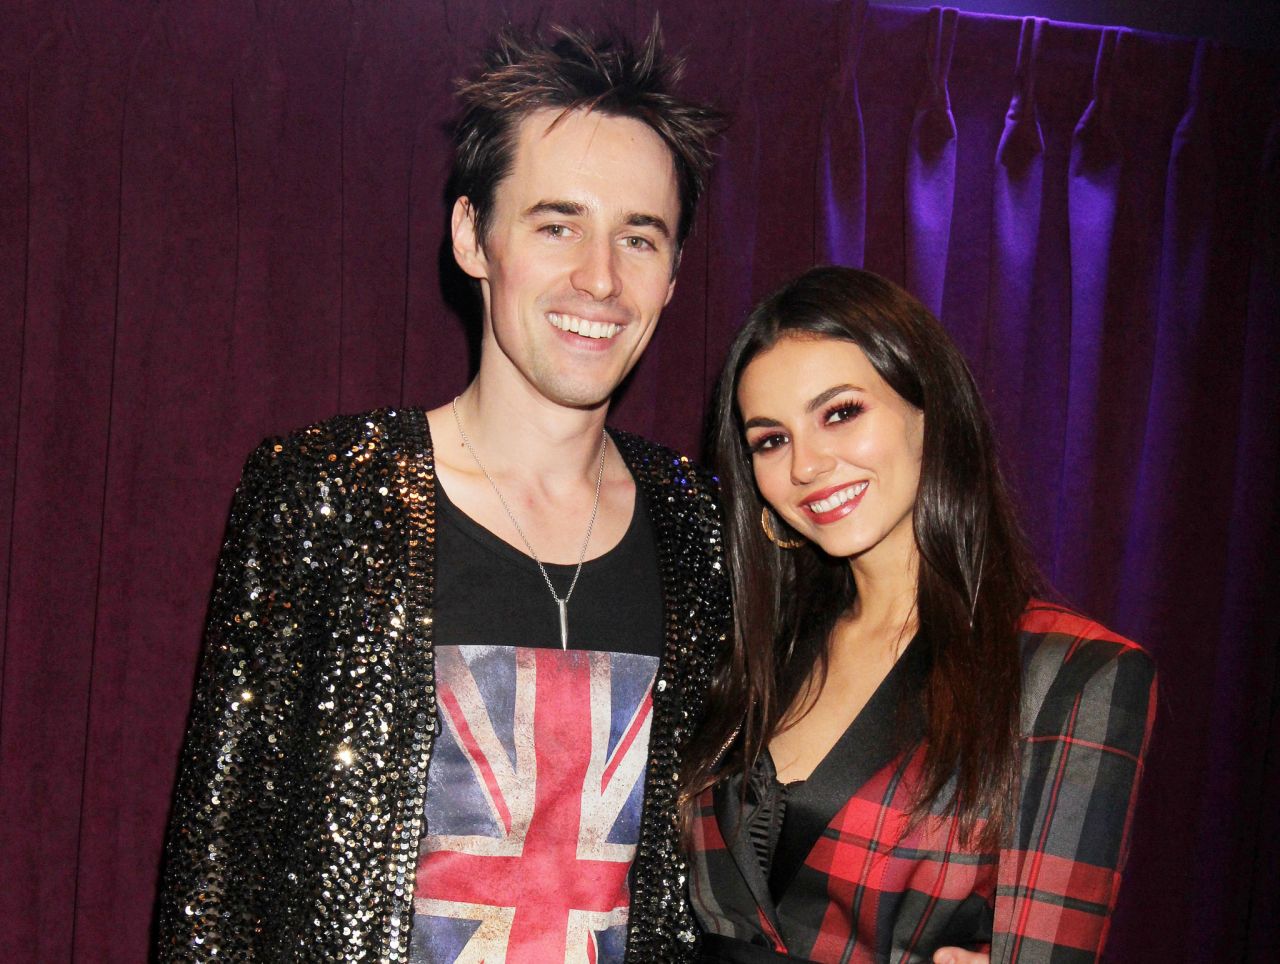 Victoria Justice and Reeve Carney - Pose Backstage at The Green Room 42 in ...